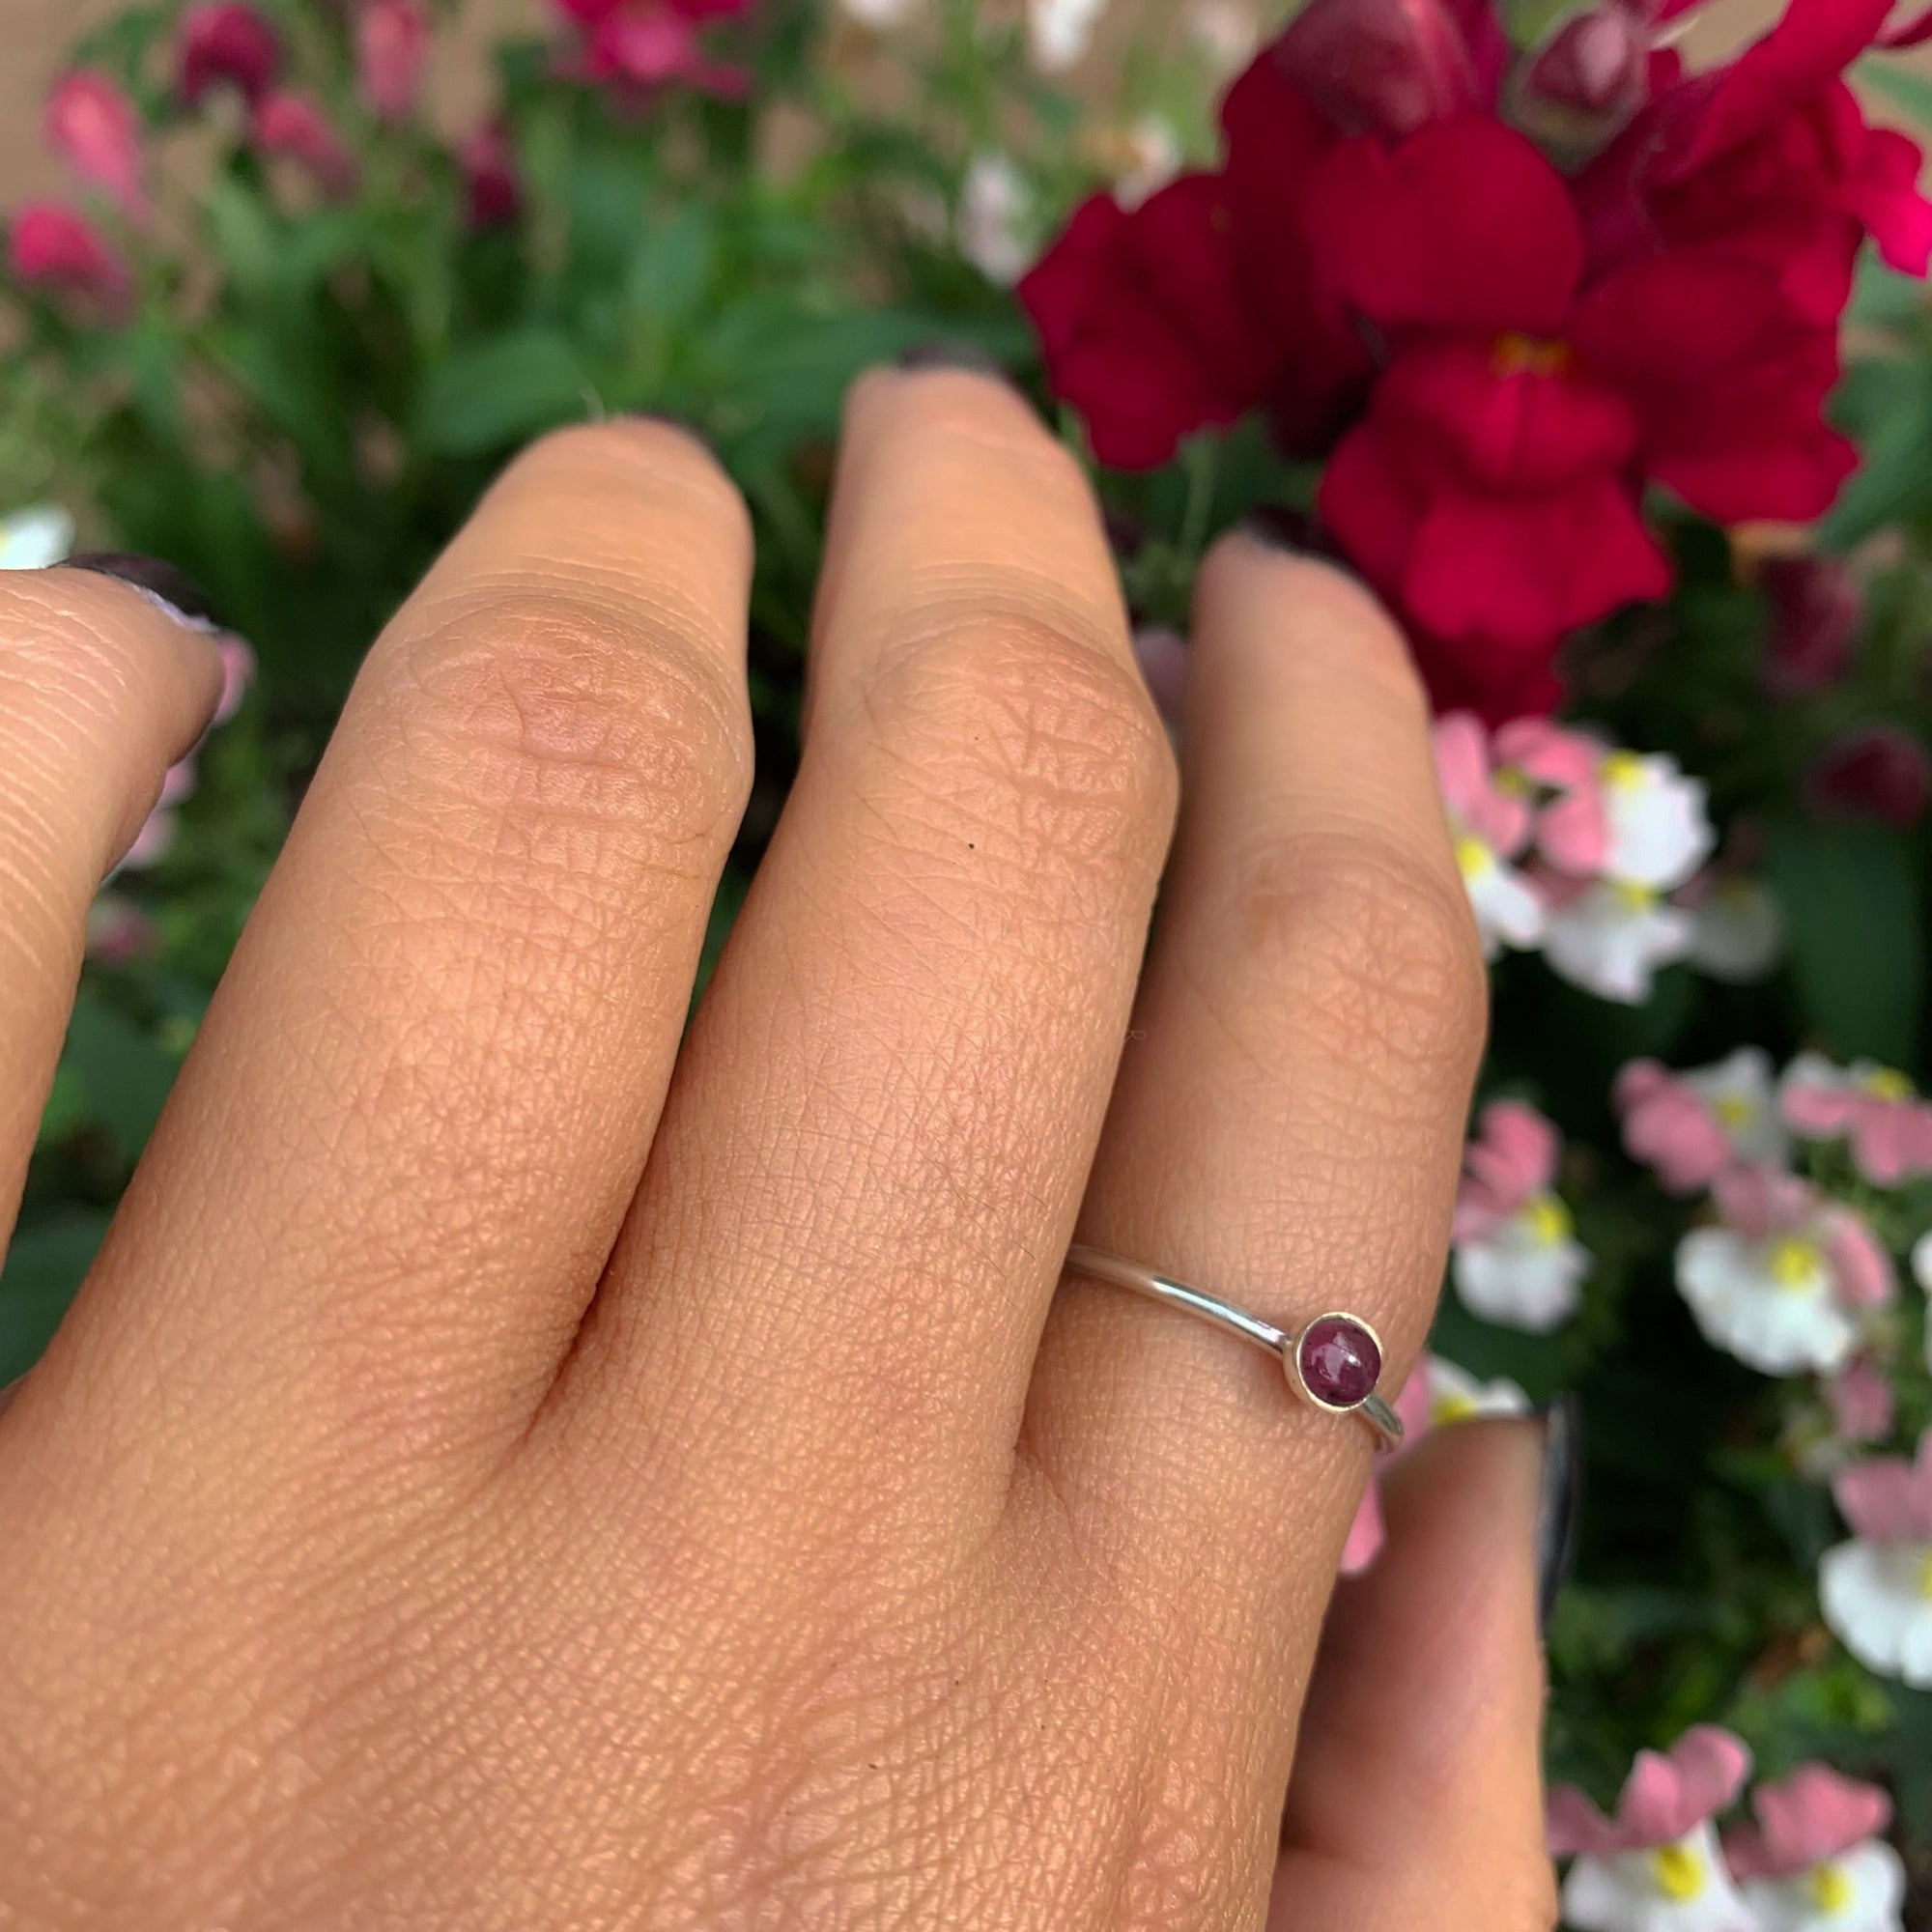 Ruby or pink sapphire? : r/jewelry